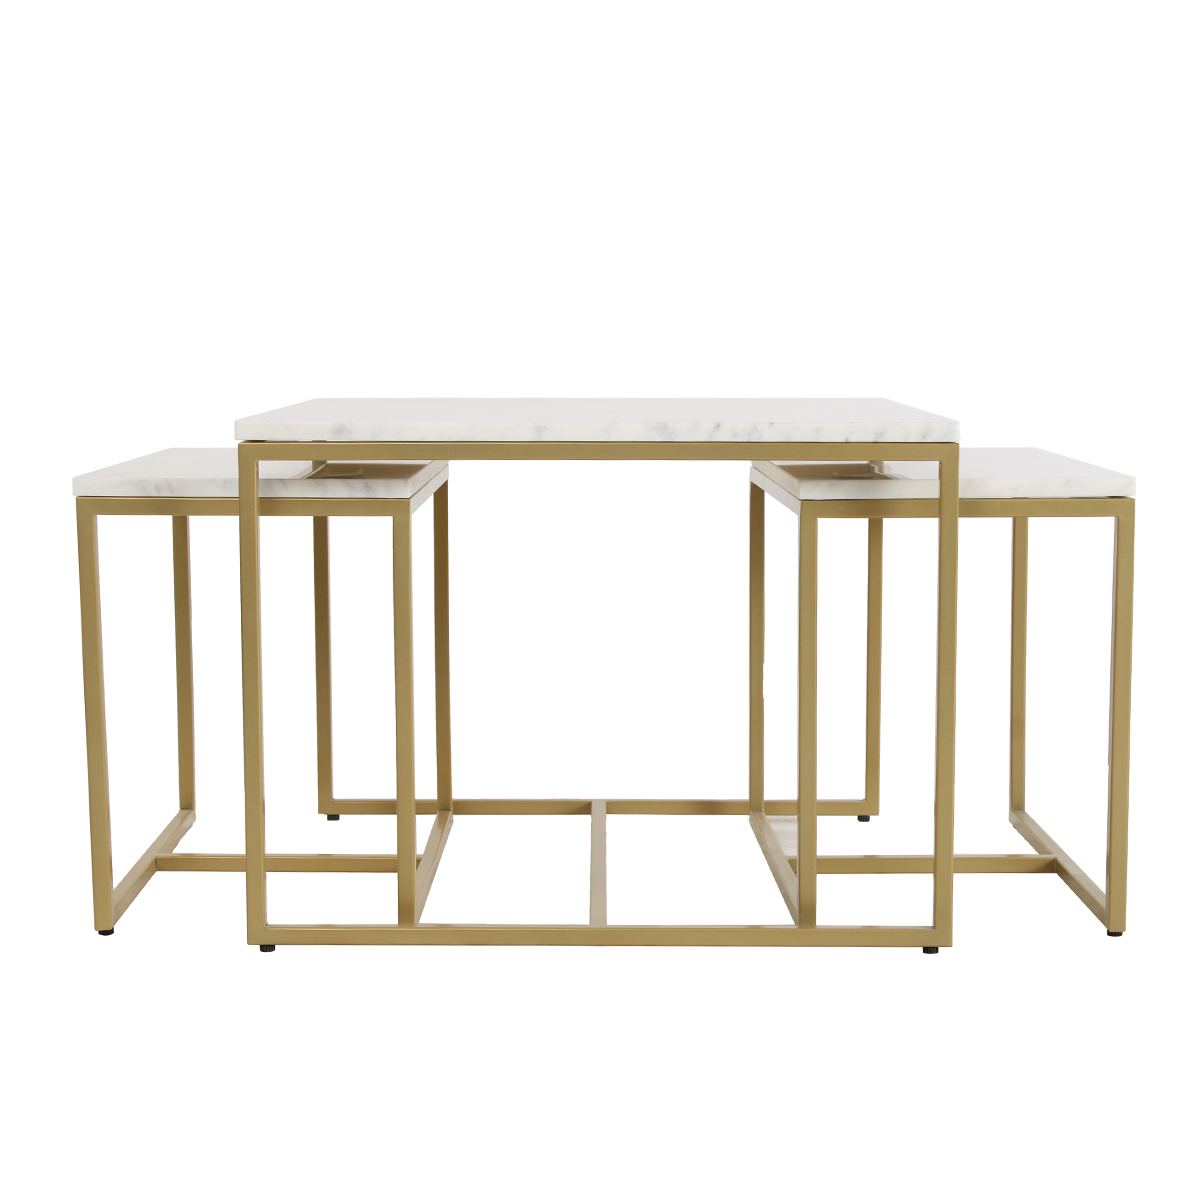 Stendal Nesting Marble Coffee Table Set of 3